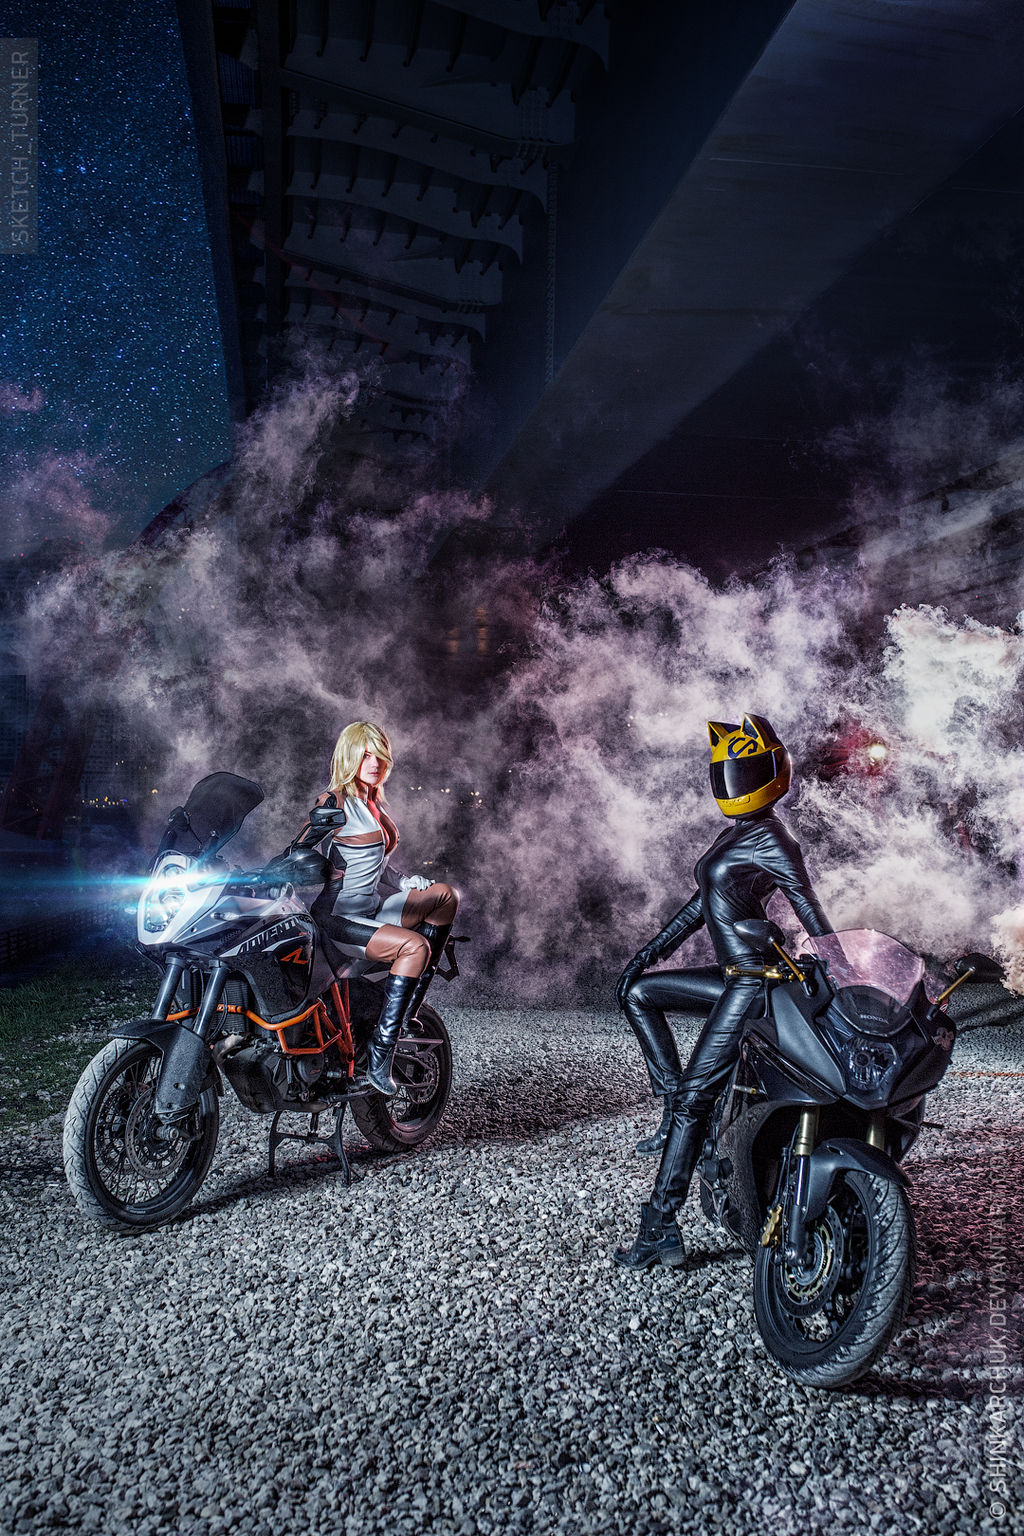 Vorona and Celty